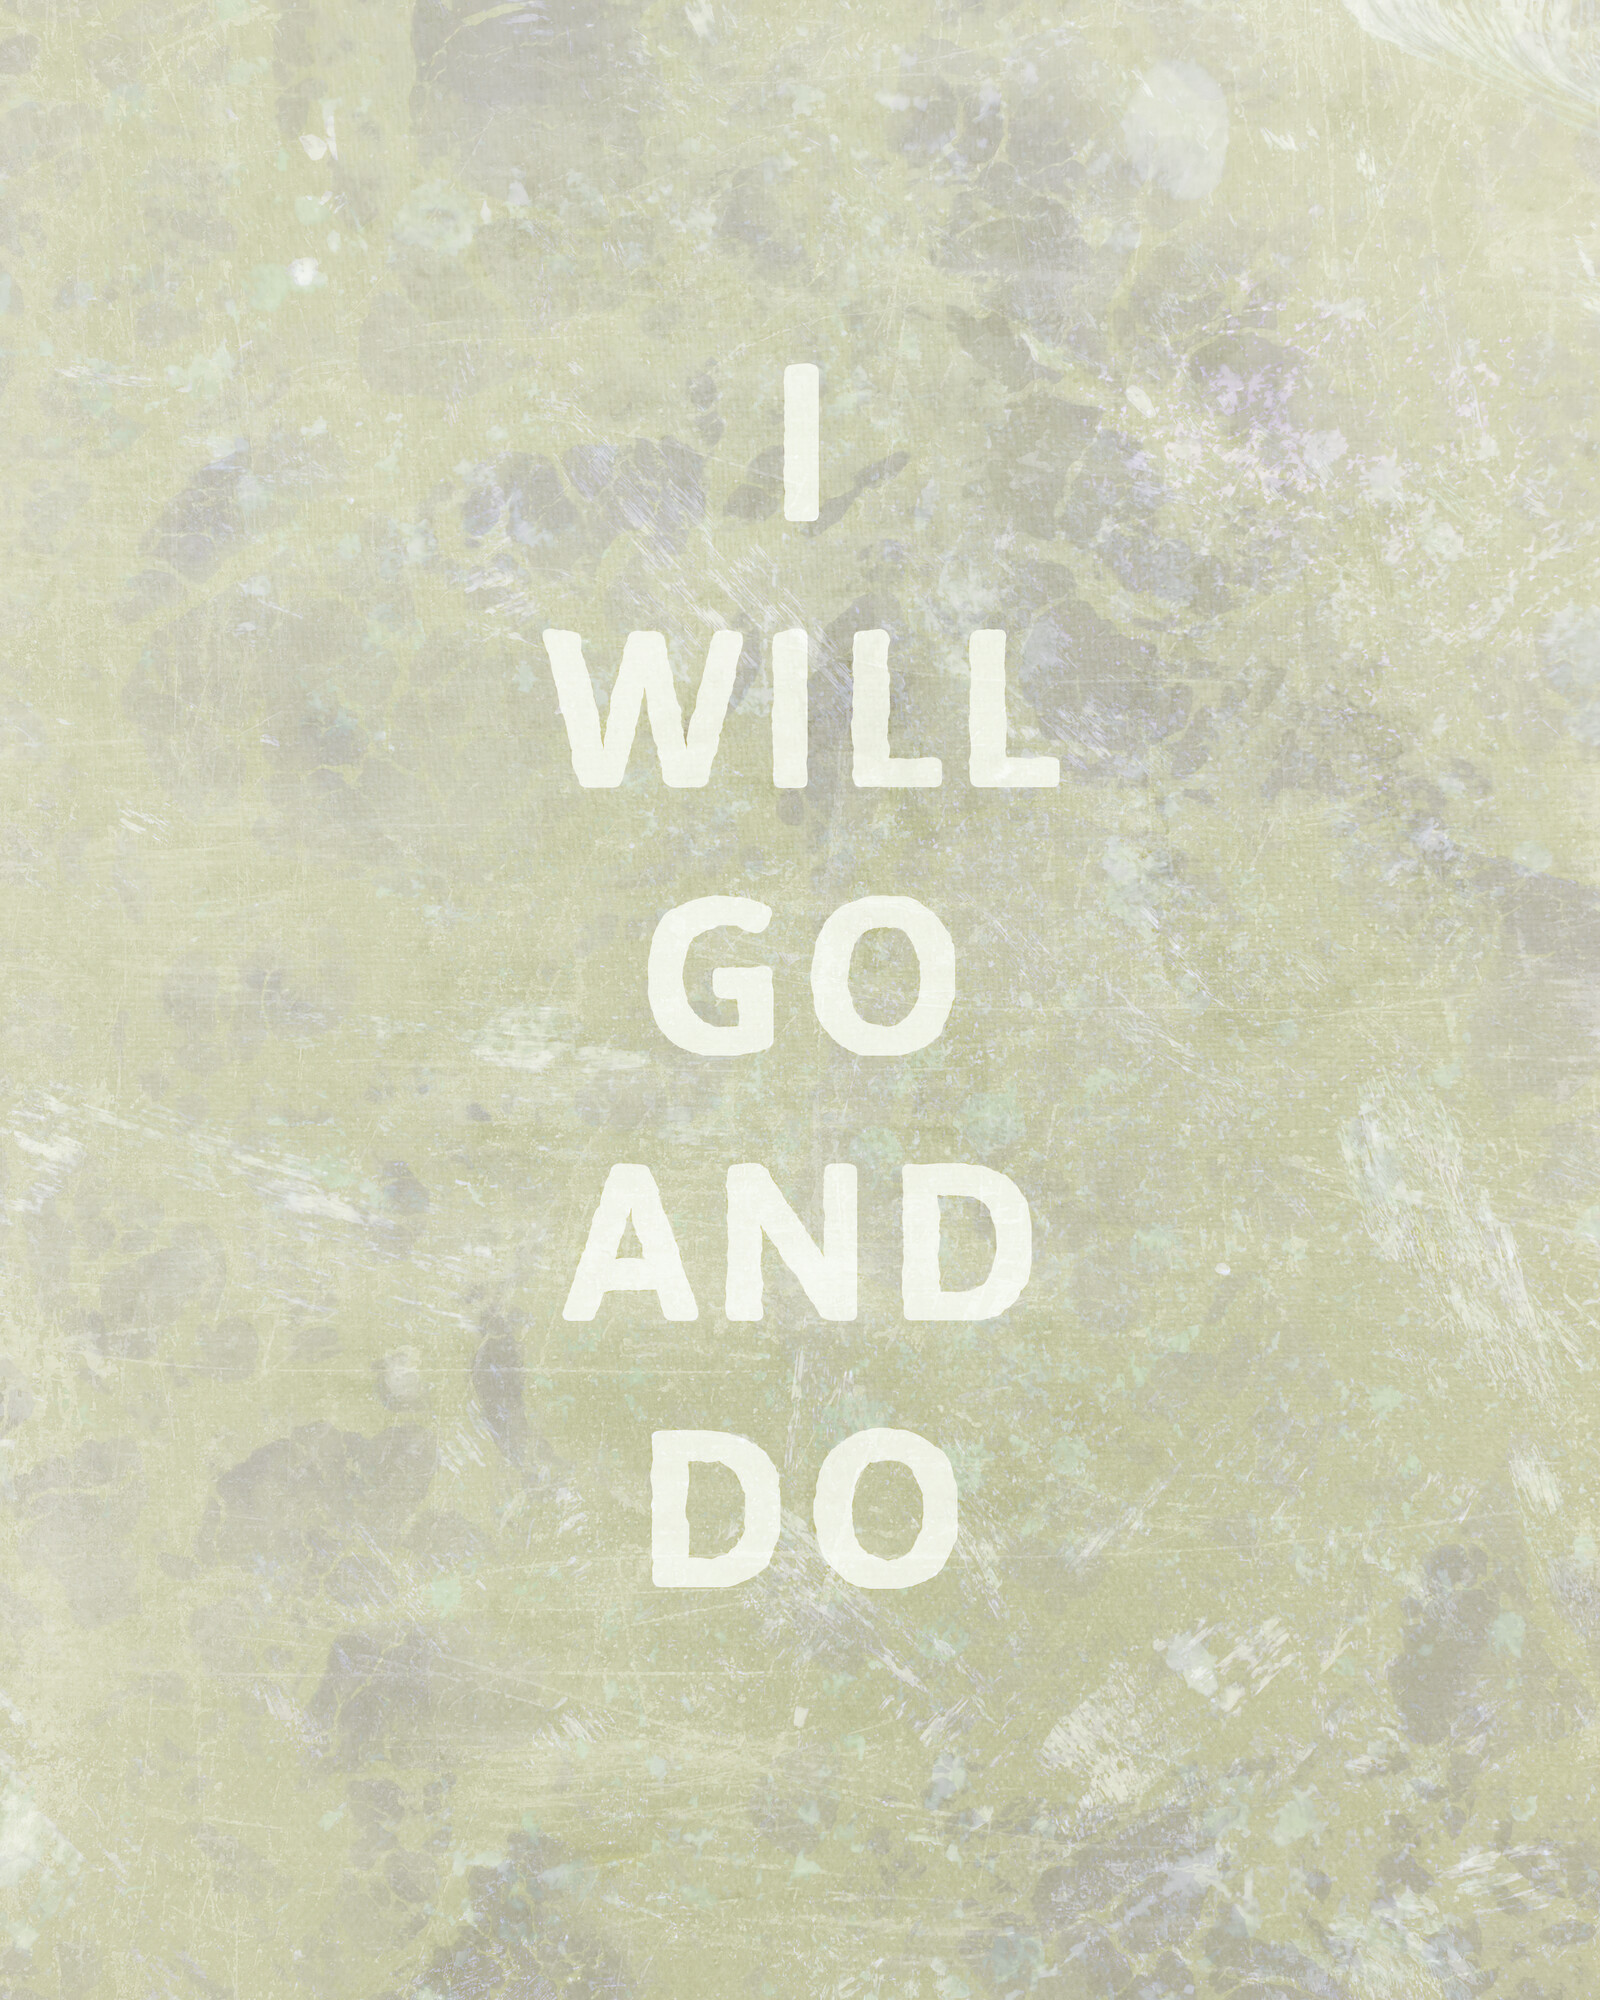 Art with the words "I will go and do" laid out vertically